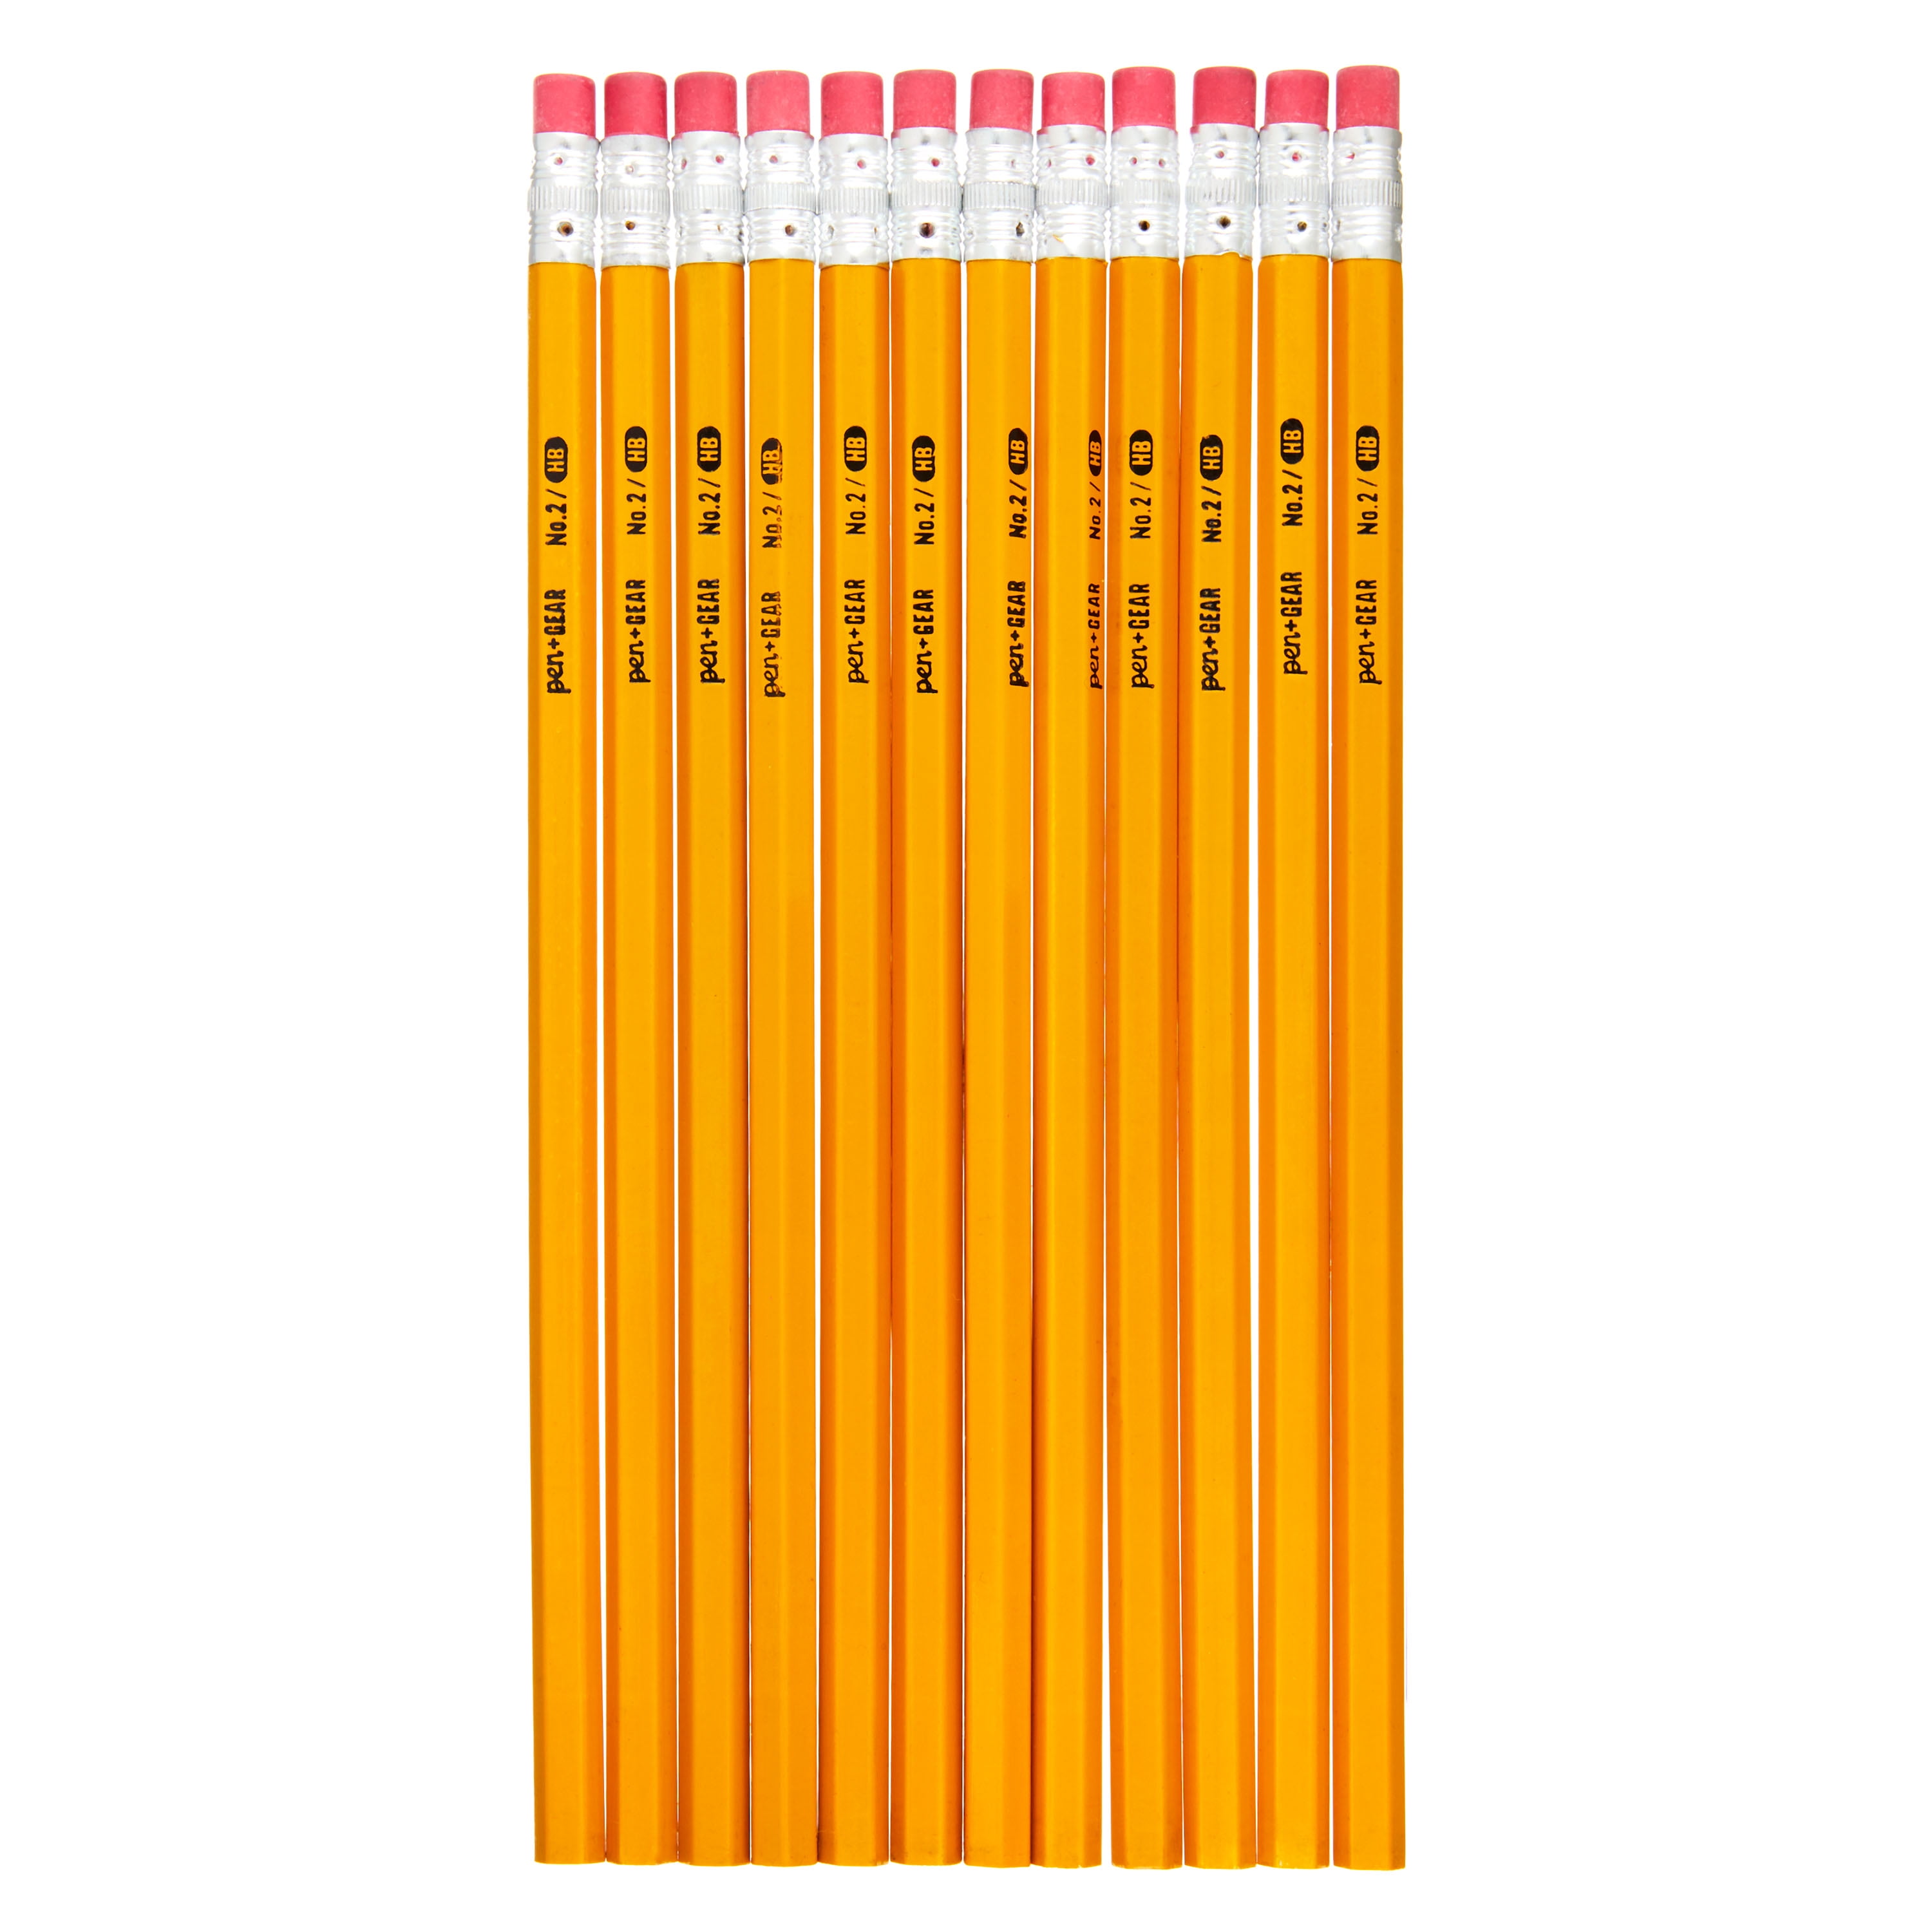 Funny Workplace Pencils | #2 Lead Pencil | Pack of 6